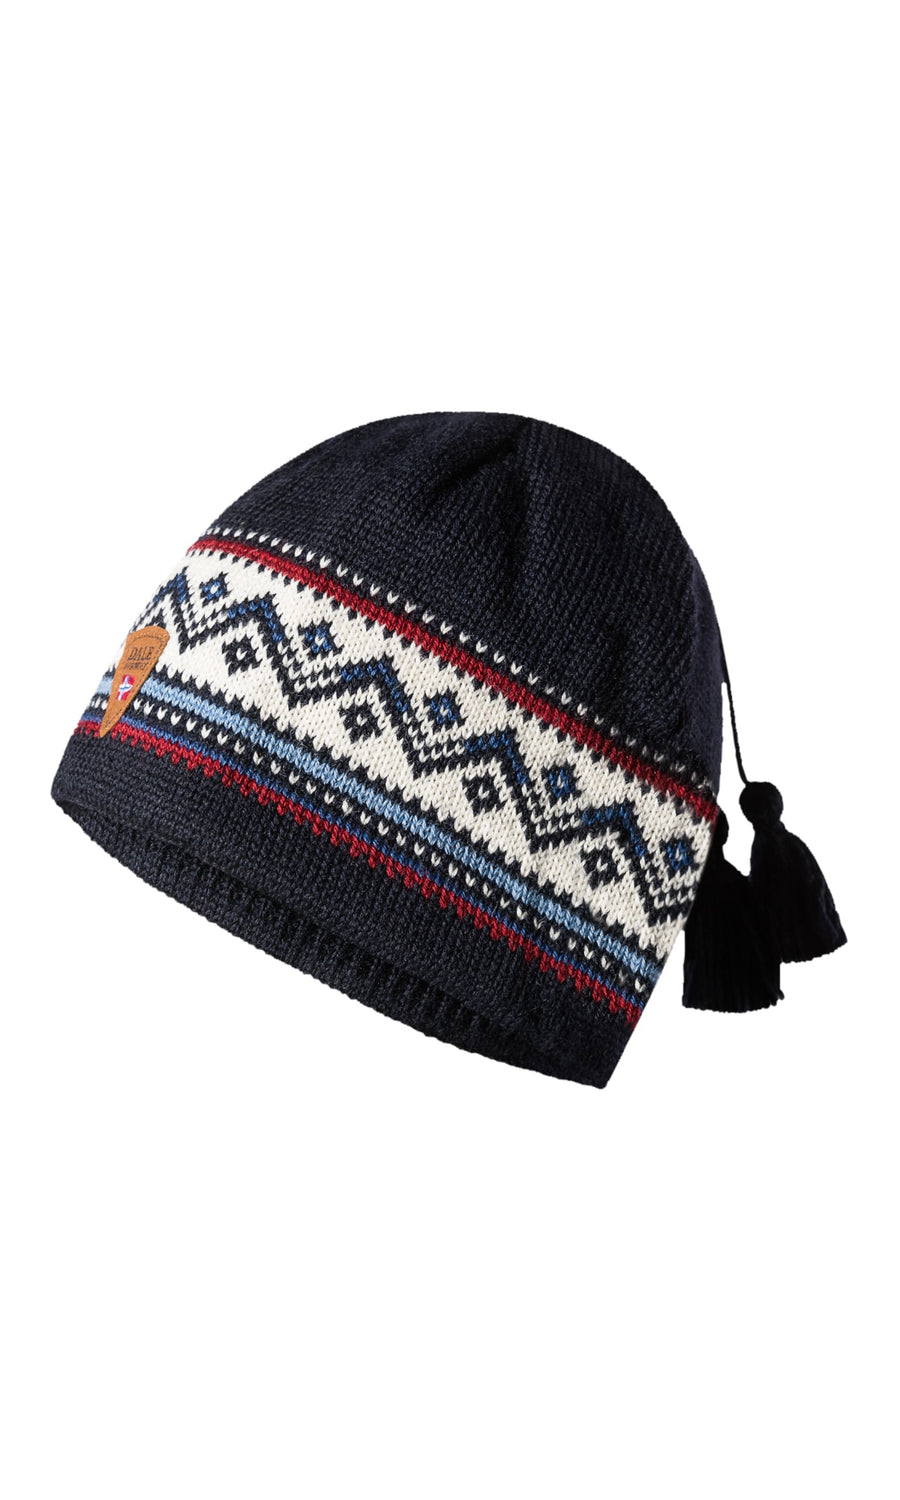 Dale of Norway - Vail Hat - Navy